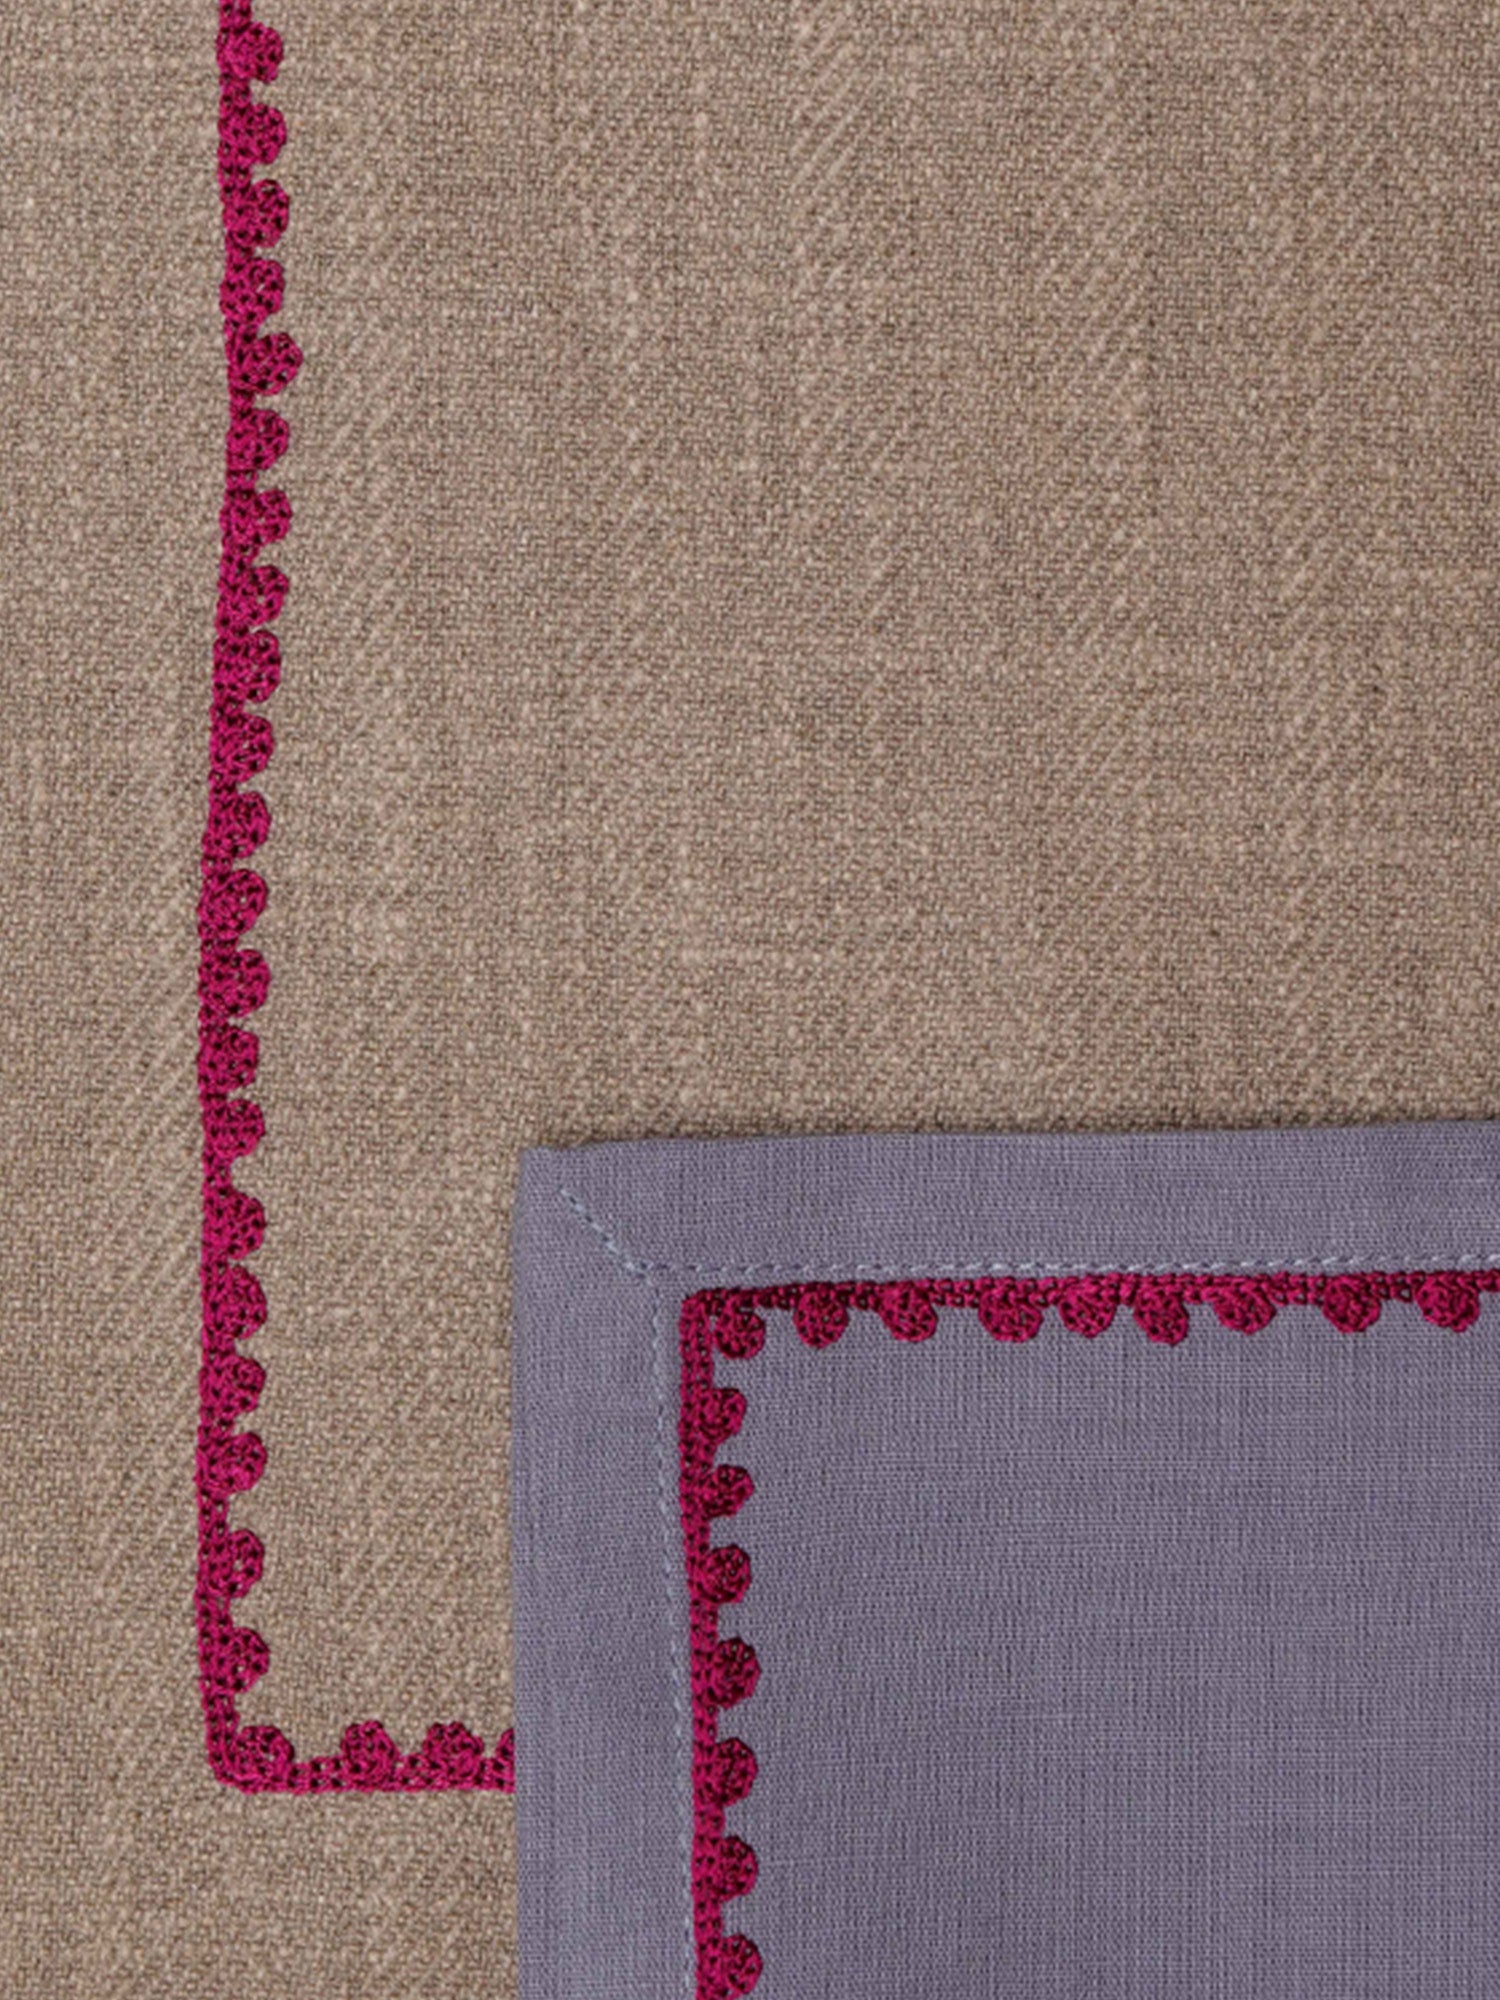 closeup of red embroidery on dinner table placemats and napkins in gray shades - 13x19 inch 